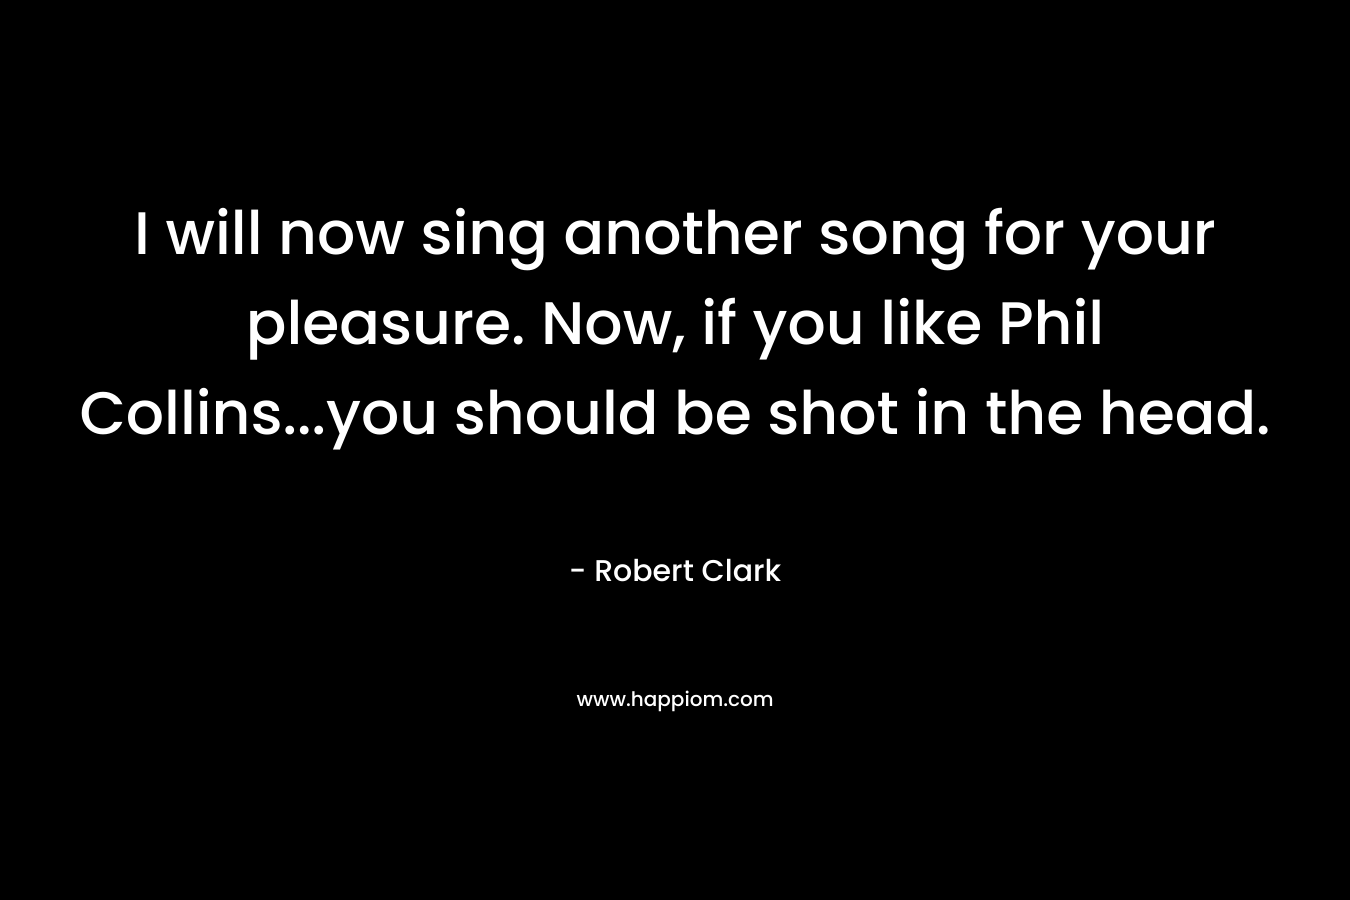 I will now sing another song for your pleasure. Now, if you like Phil Collins...you should be shot in the head.